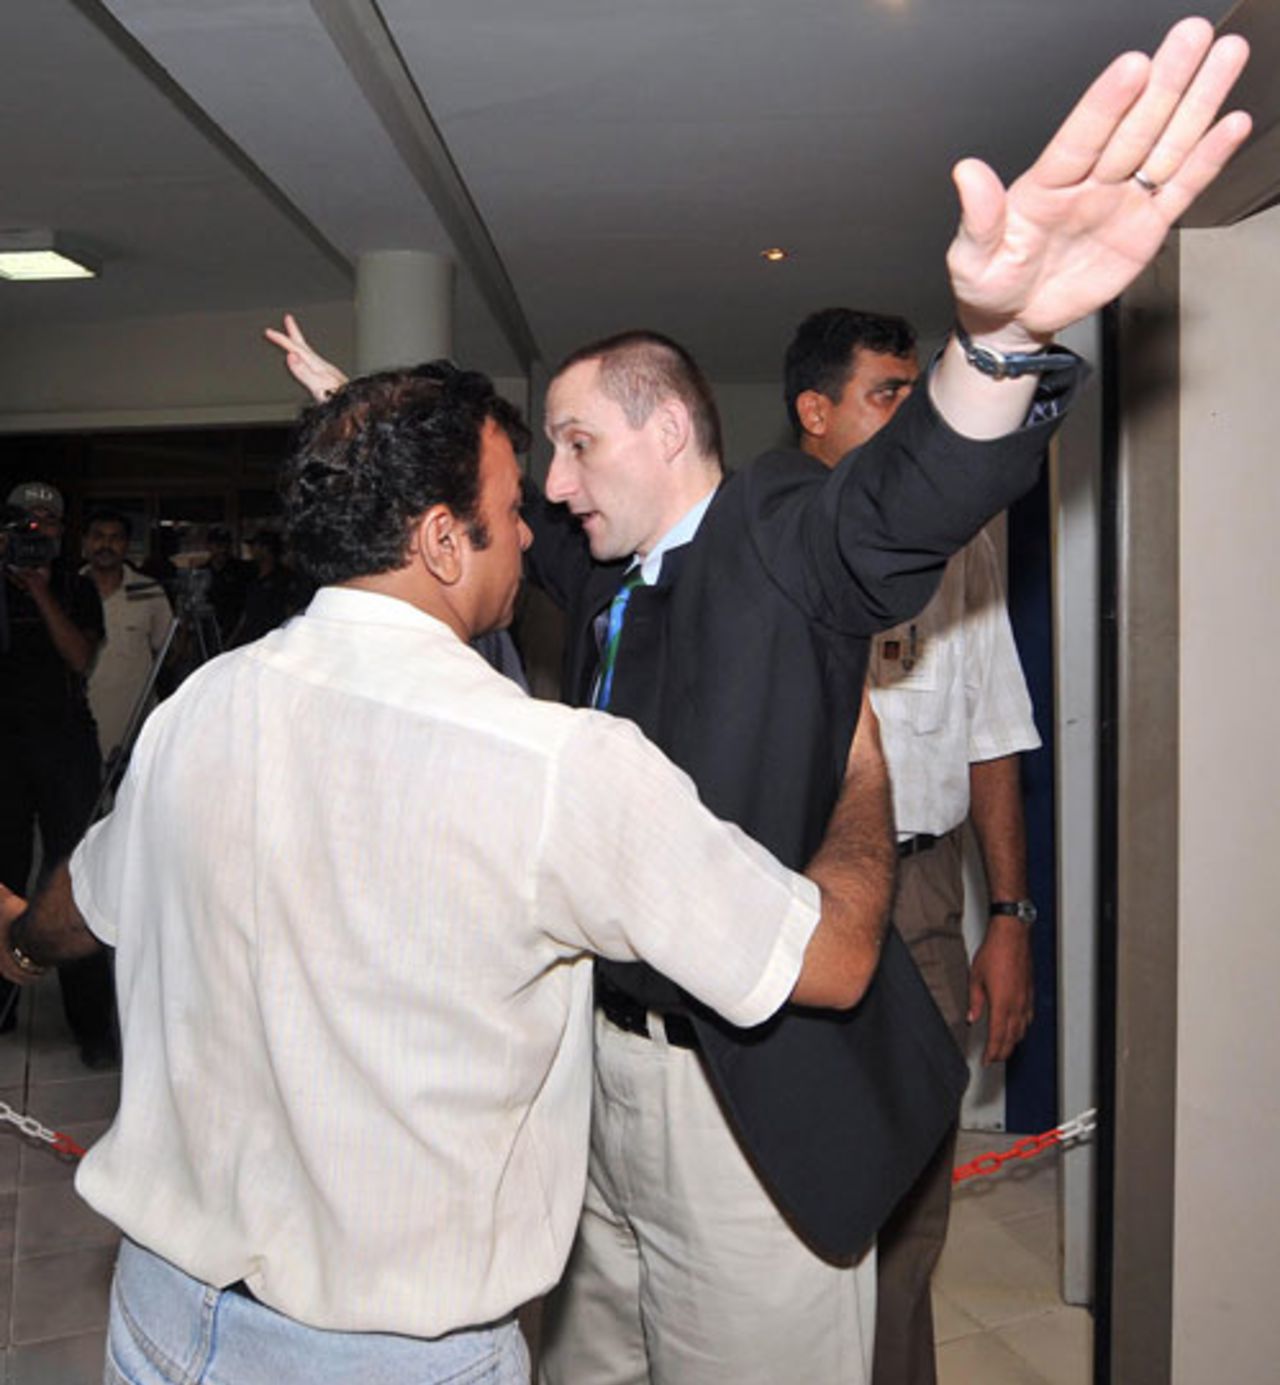 A security guard searches Brian Murgatroyd, one of six members of the ICC delegation in Pakistan ahead of the Champions Trophy, Lahore, August 11, 2008